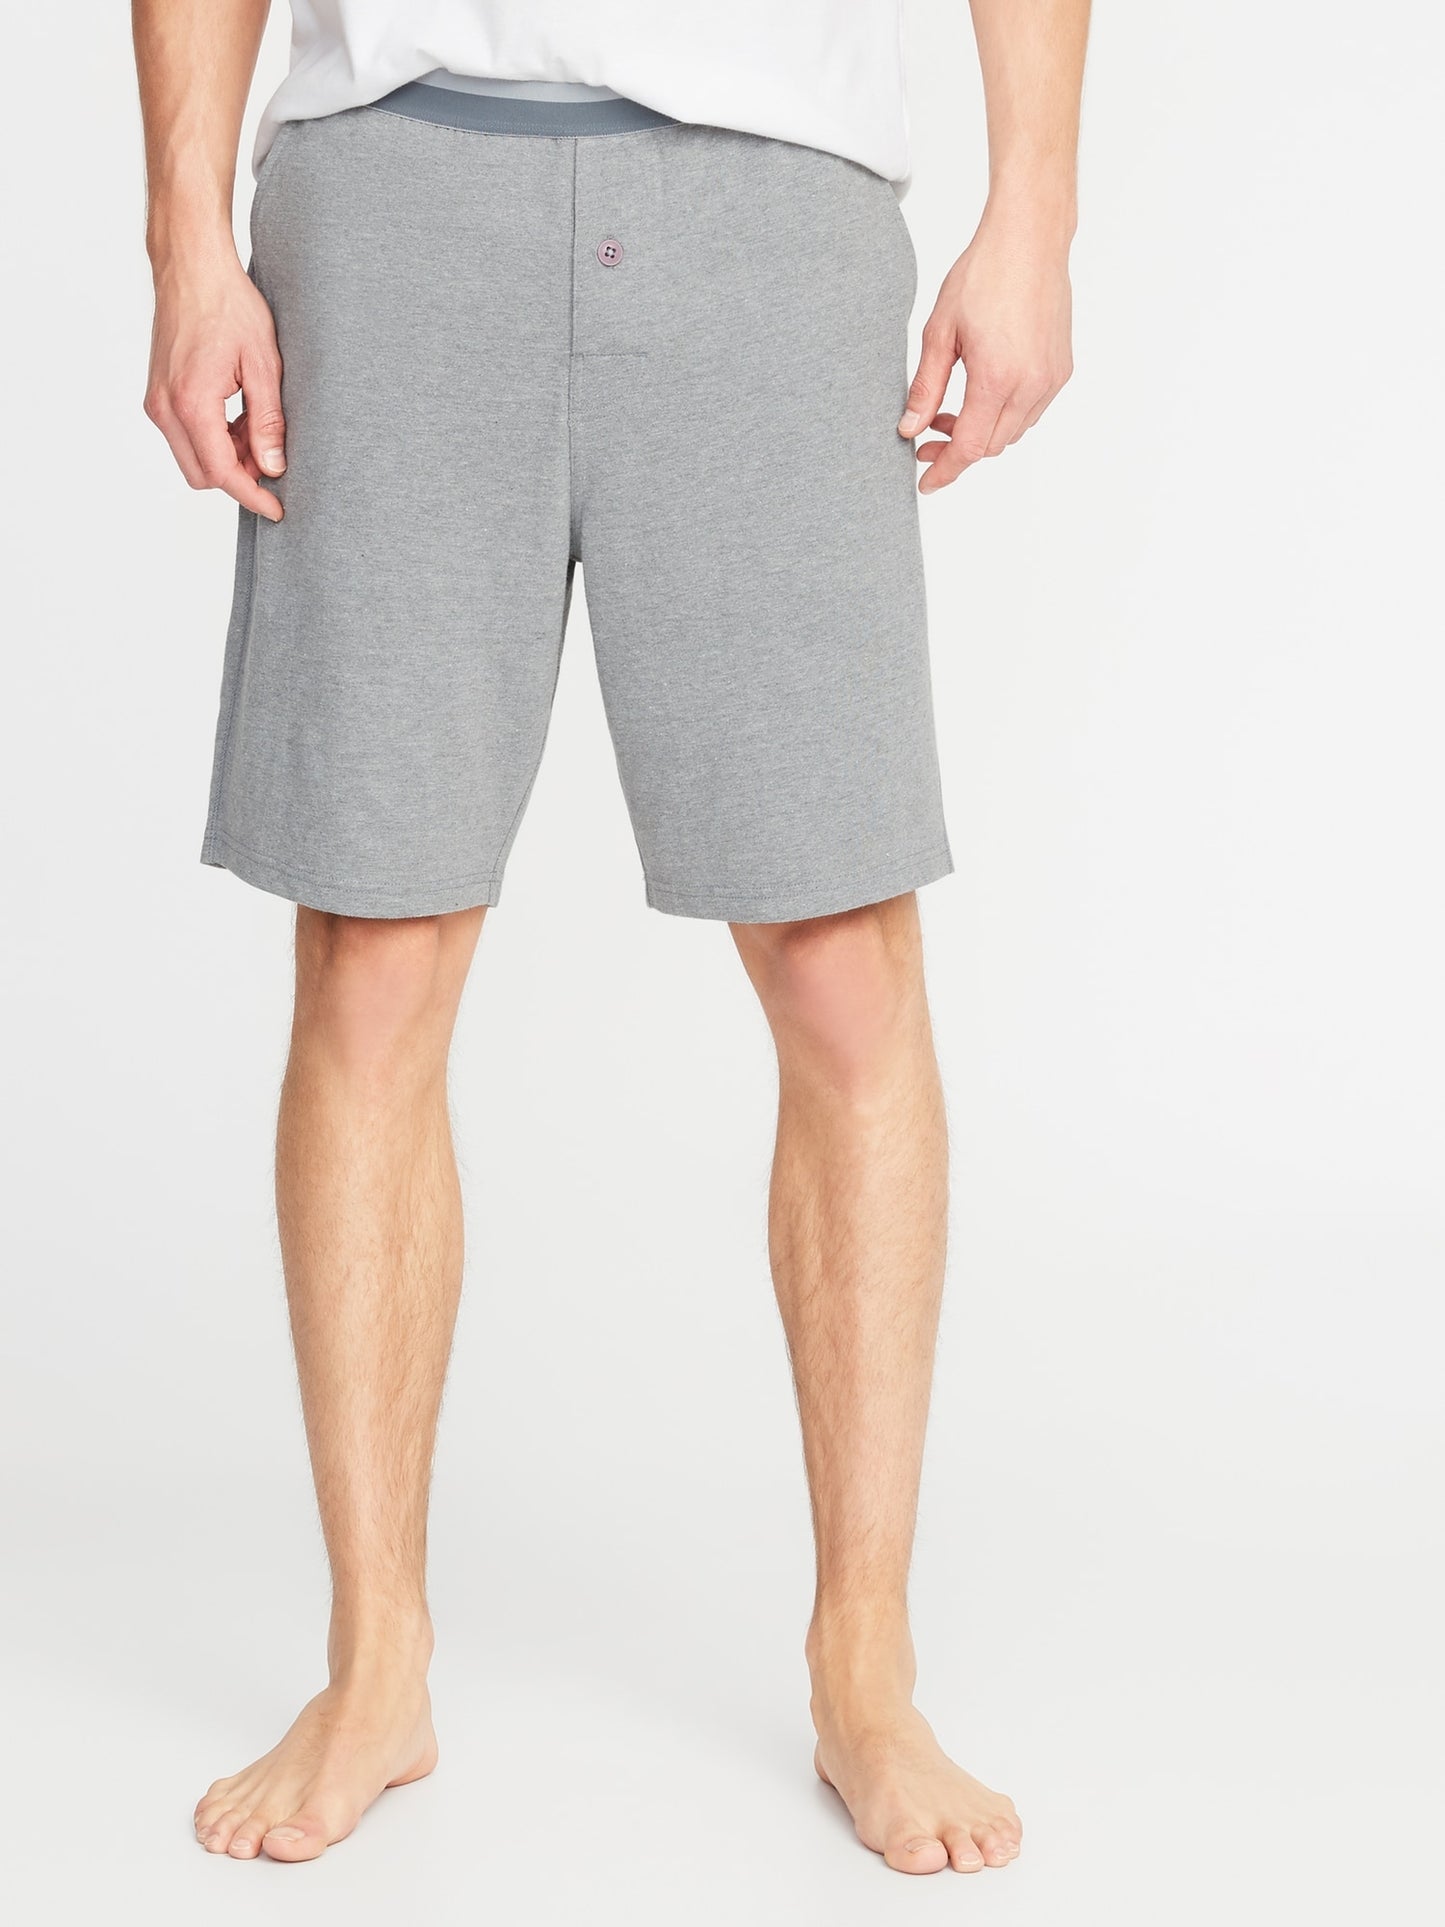 ON Jersey Pajama Shorts For Men -- 9-Inch Inseam - Heather Gray